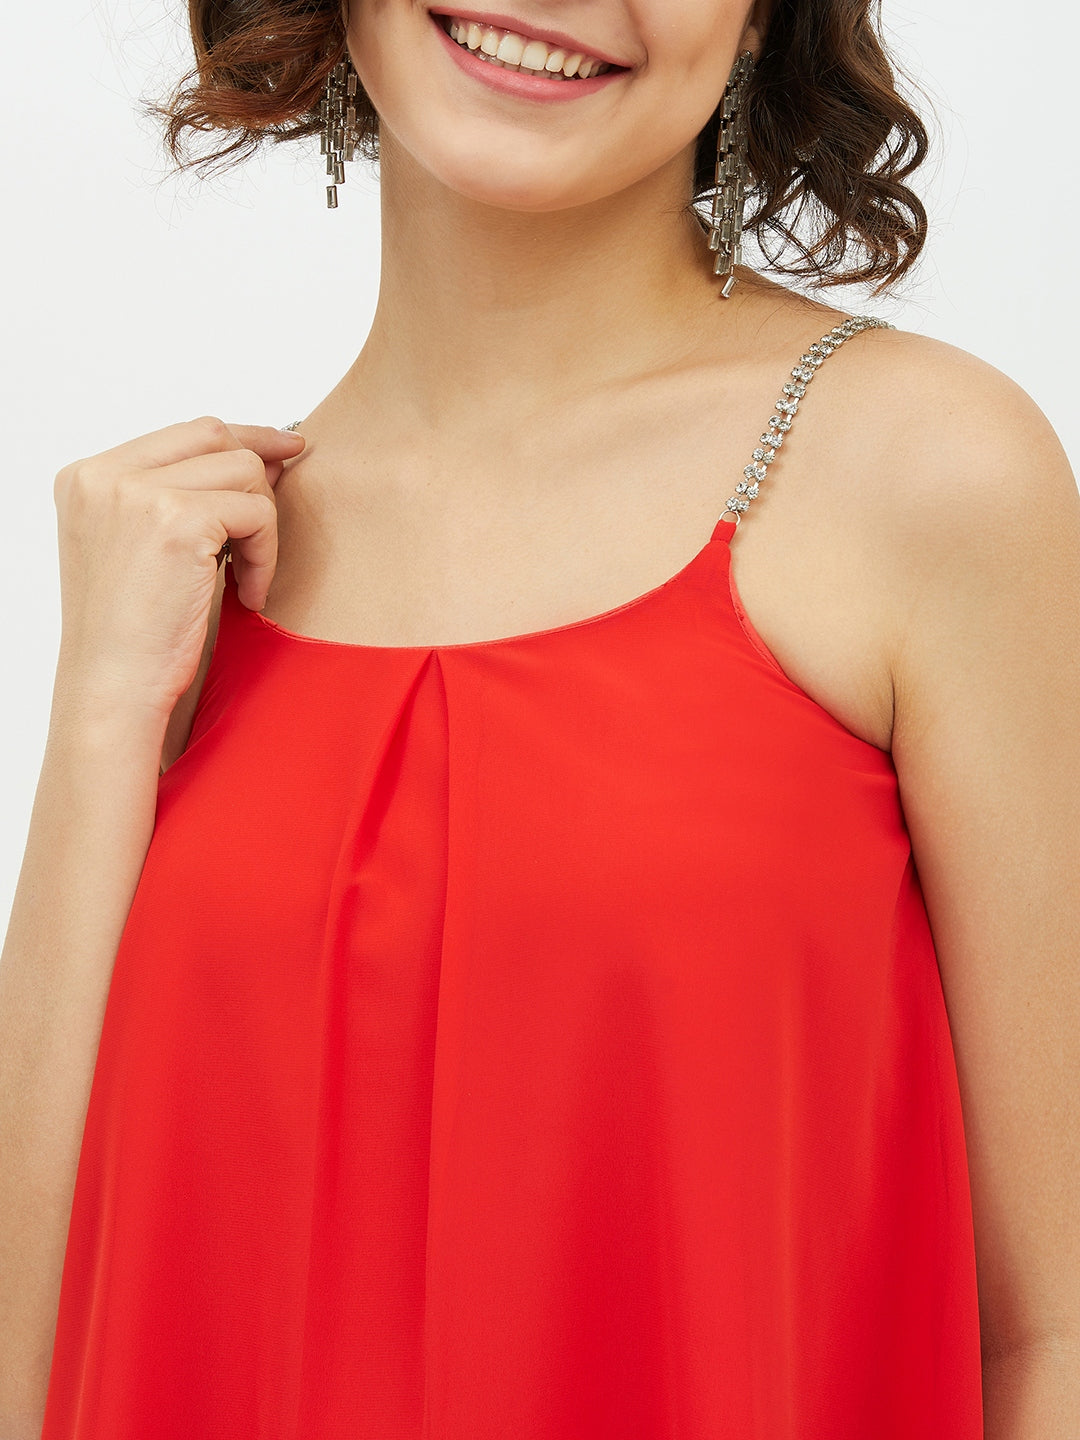 Women's Red top with embellished Strap